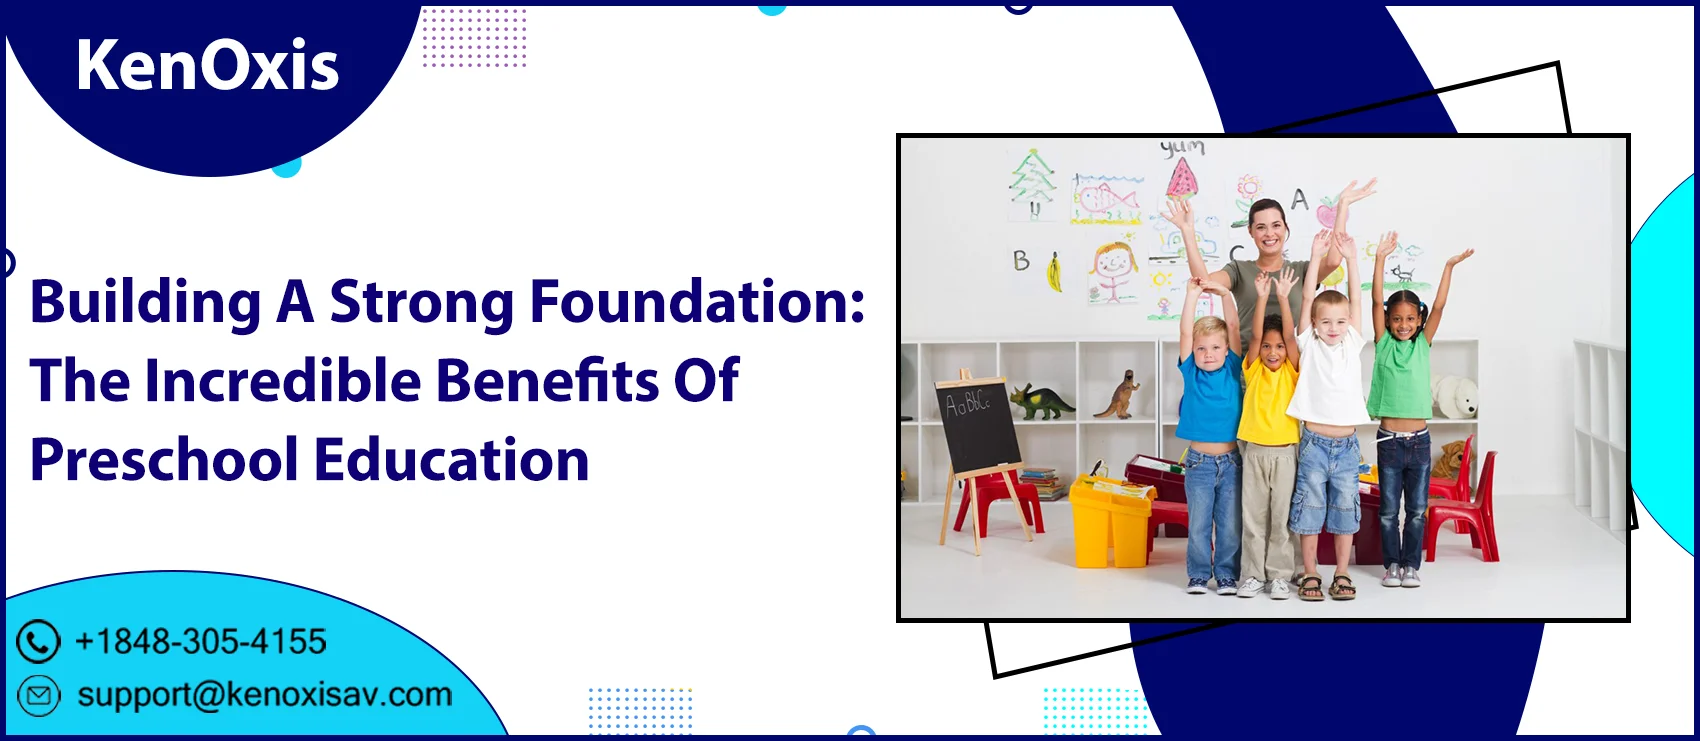 Building A Strong Foundation: The Incredible Benefits Of Preschool Education